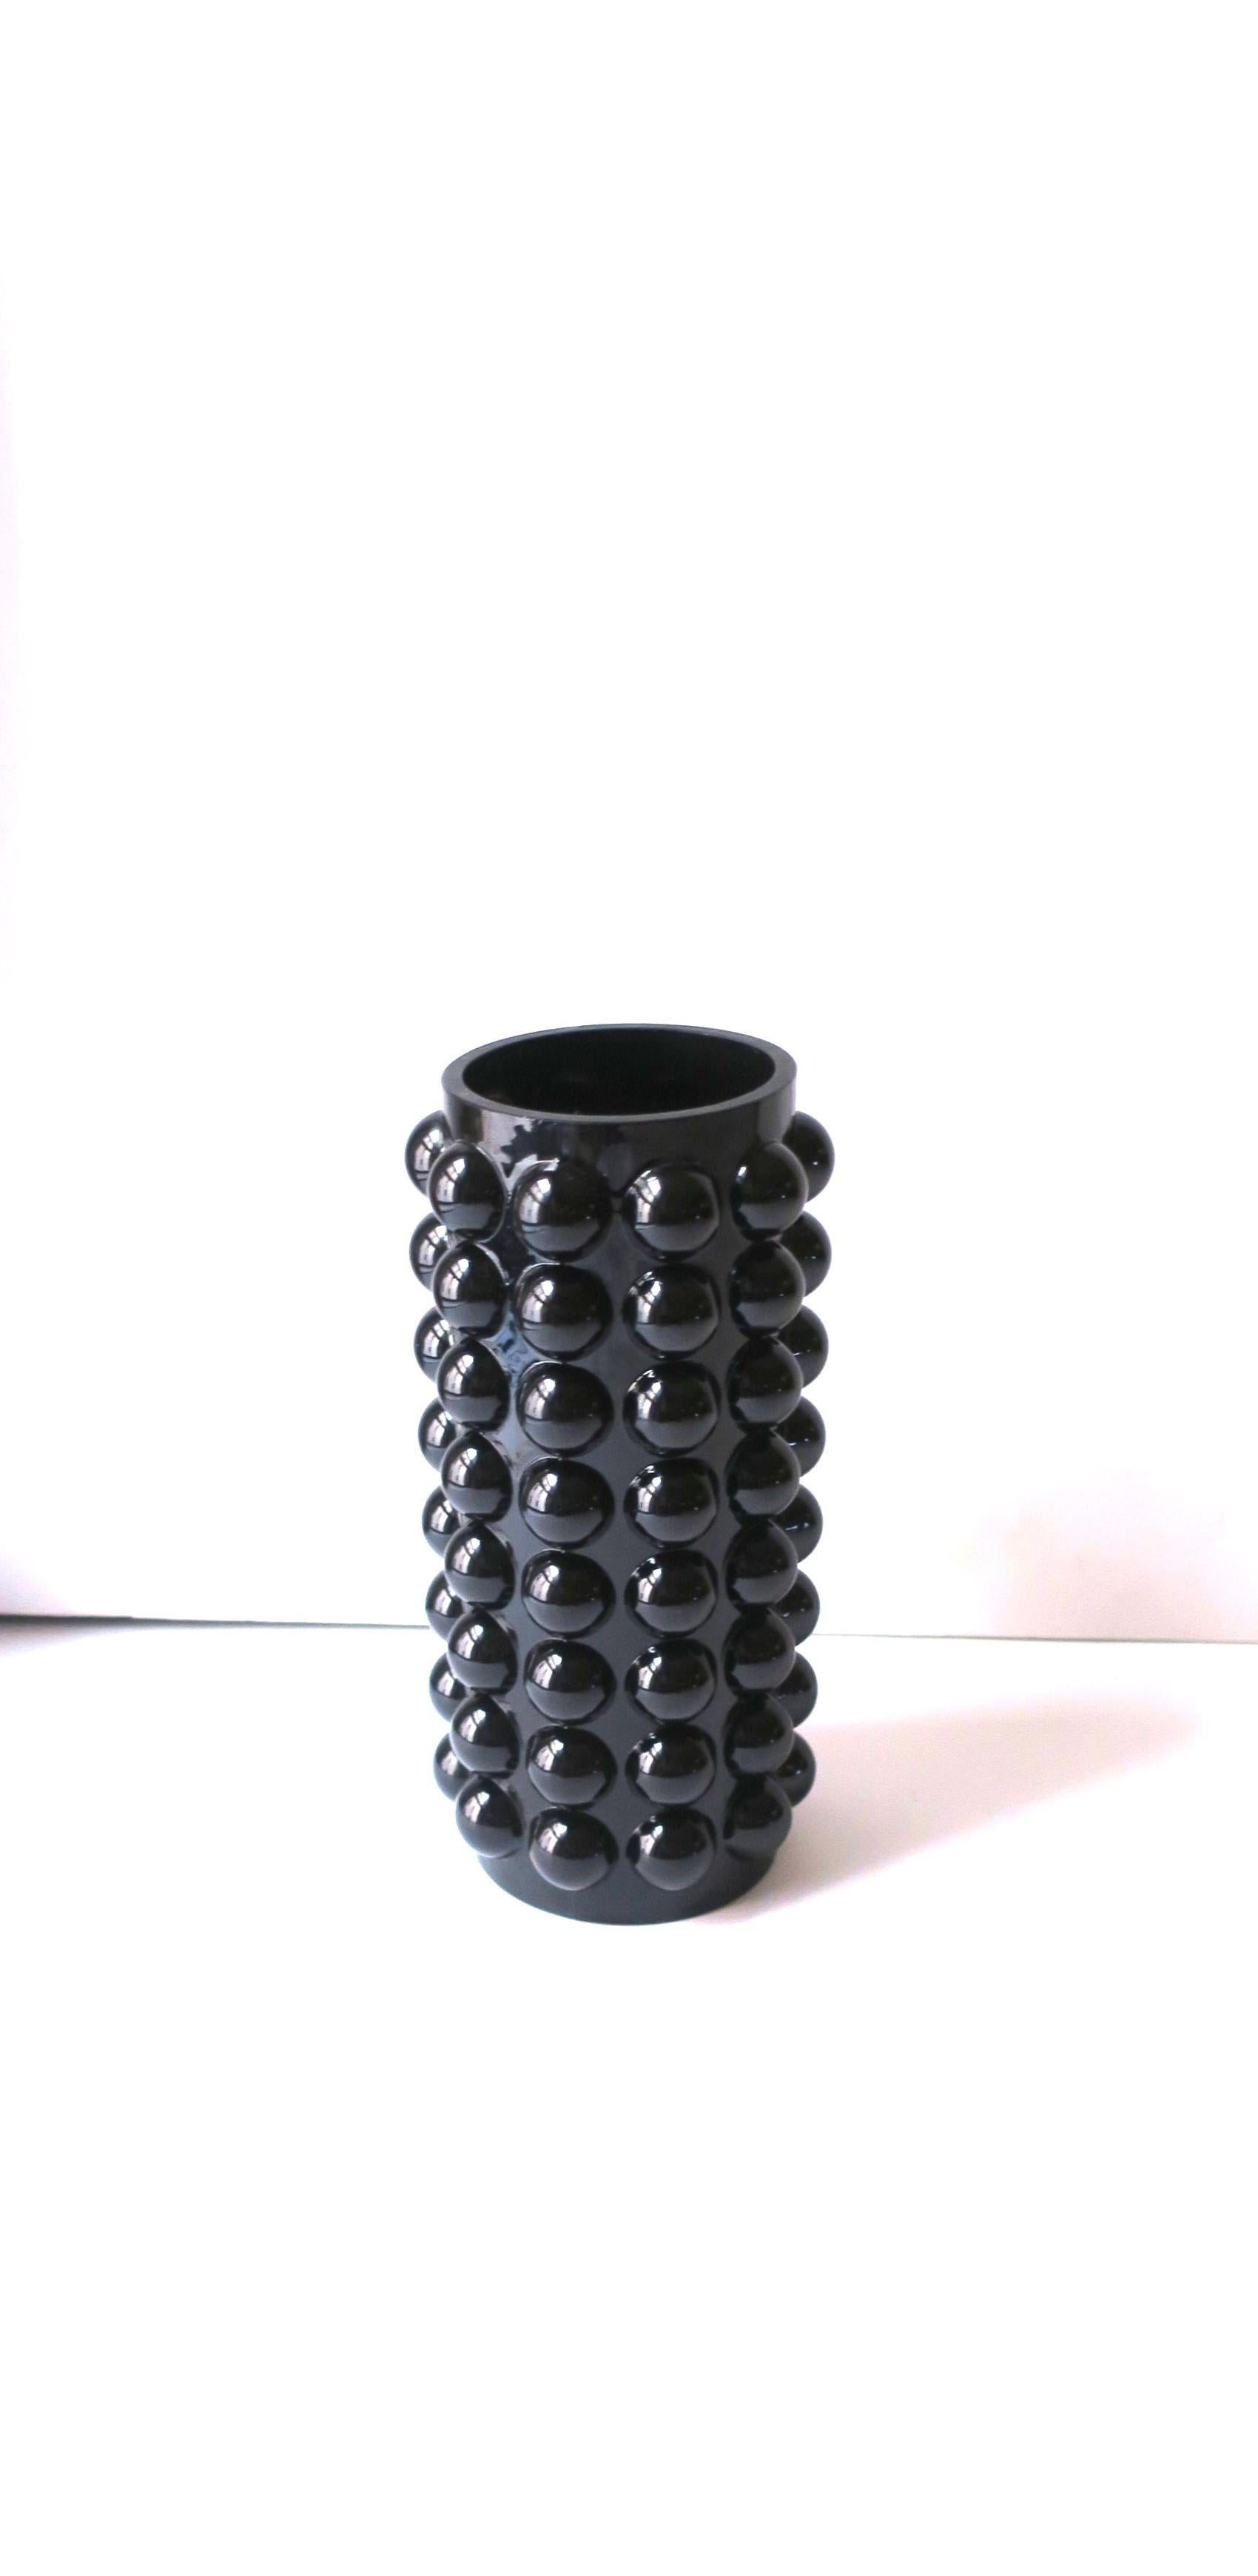 A black glass vase with ball sphere design, in the Modern-Deco style. A beautiful piece with or without flowers, as shown. Dimensions: 4